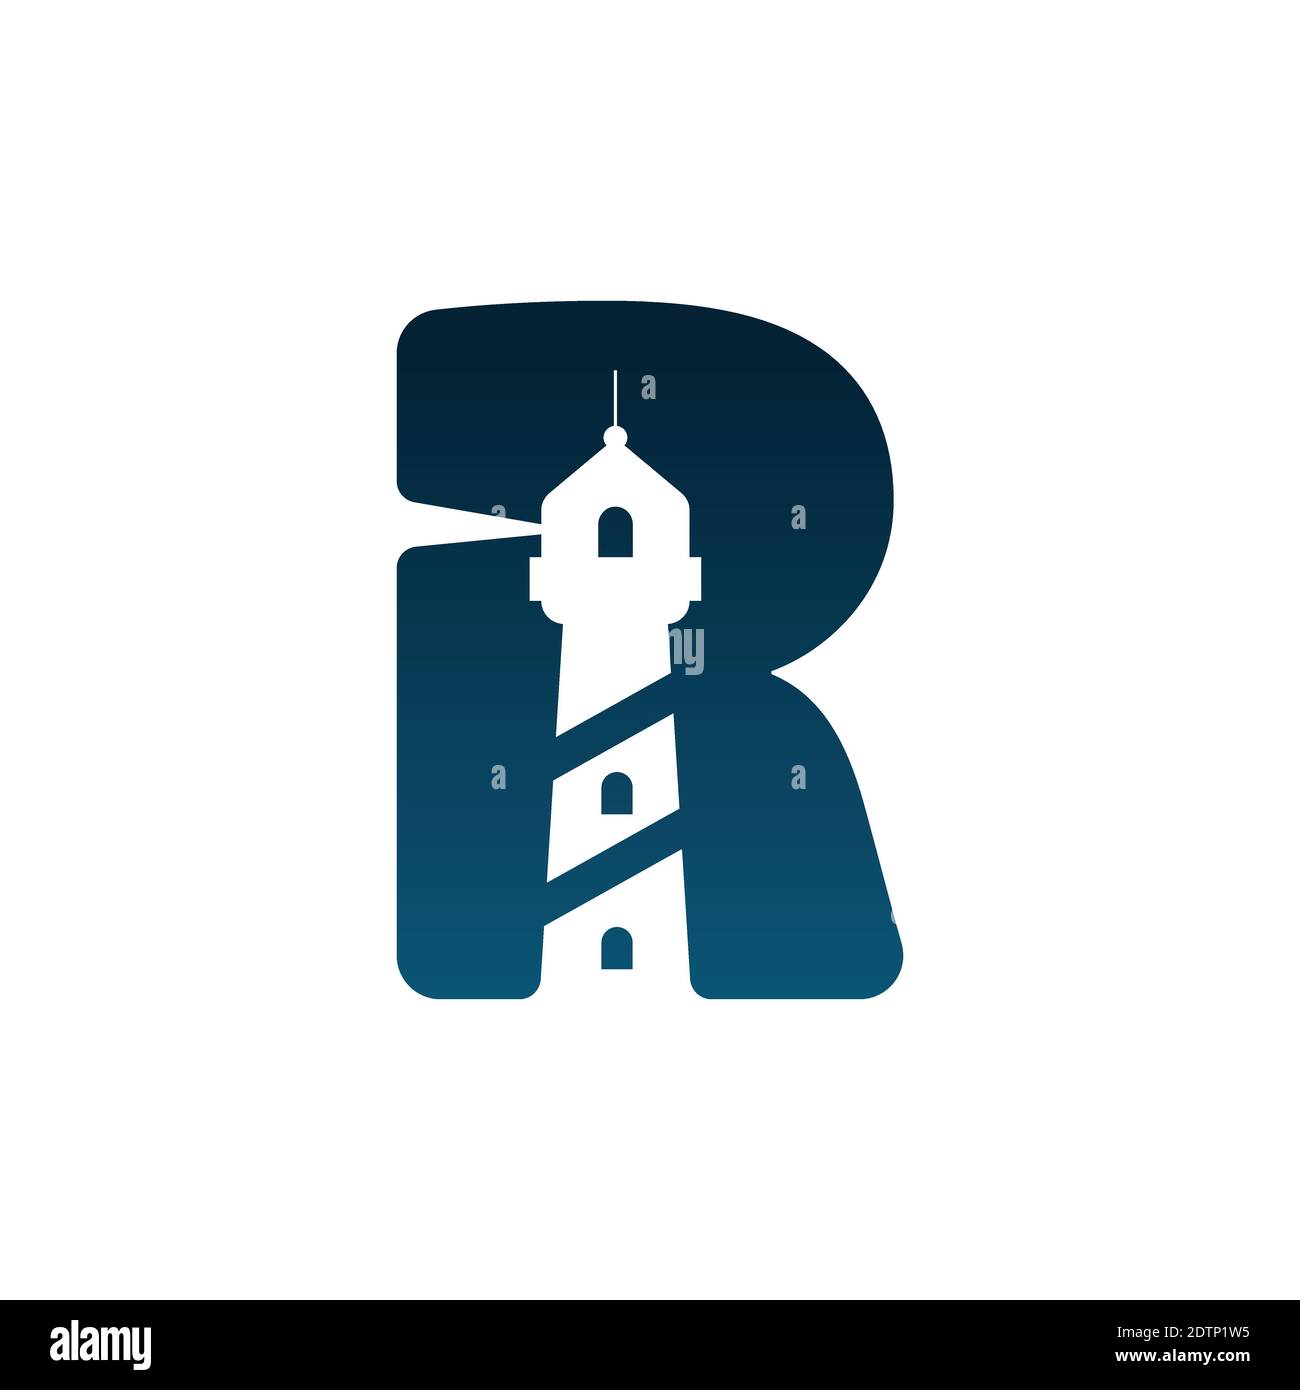 Letter R Lighthouse logo vector image. Lighthouse with letter R in negative space design logo vector image Stock Vector